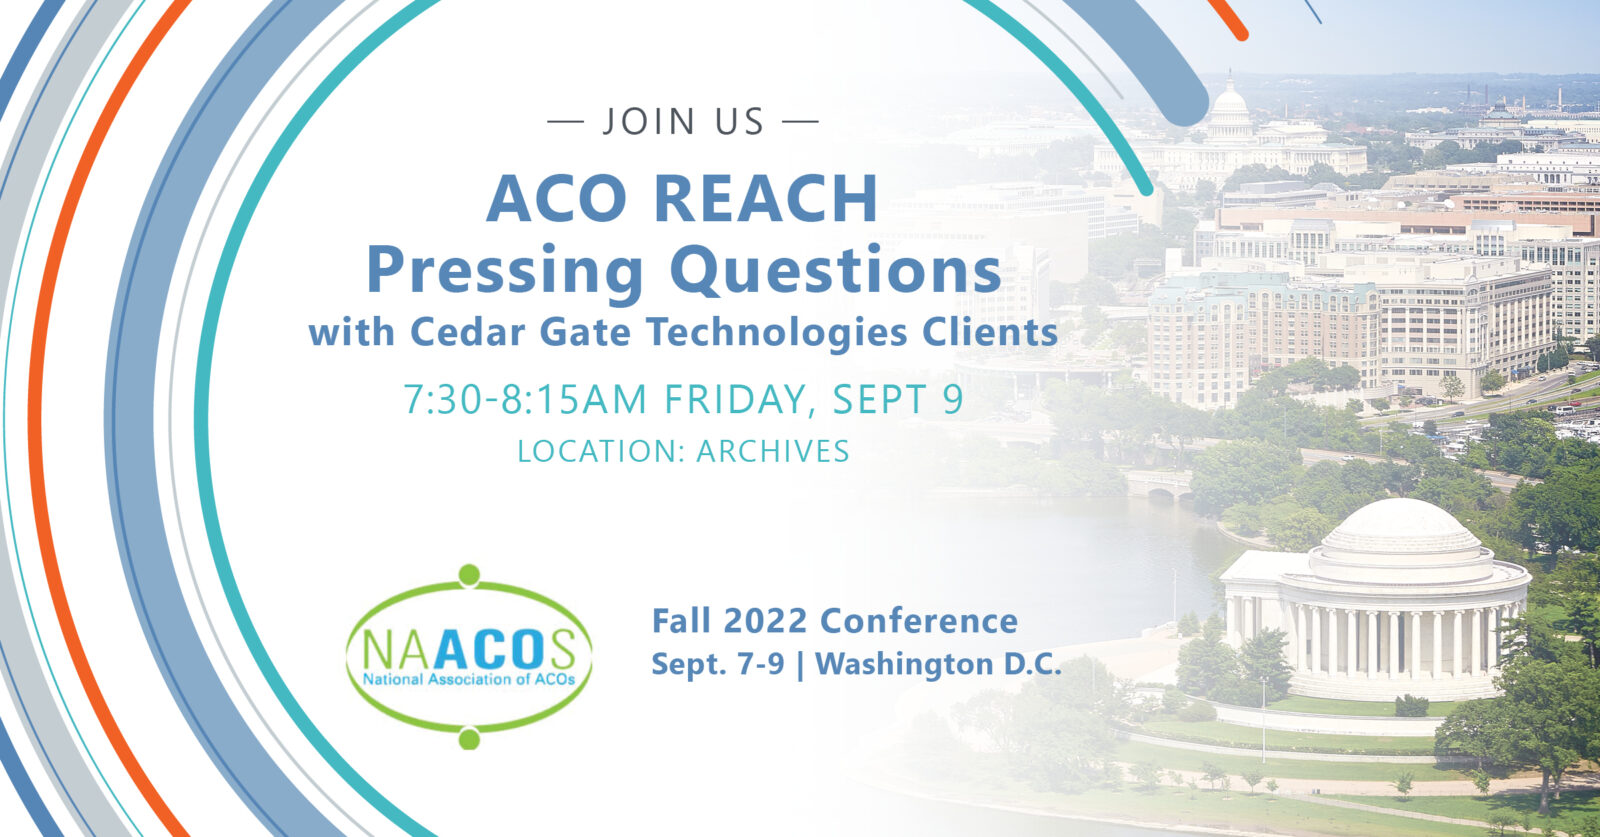 Fall NAACOS Conference ACO REACH Pressing Questions with Cedar Gate